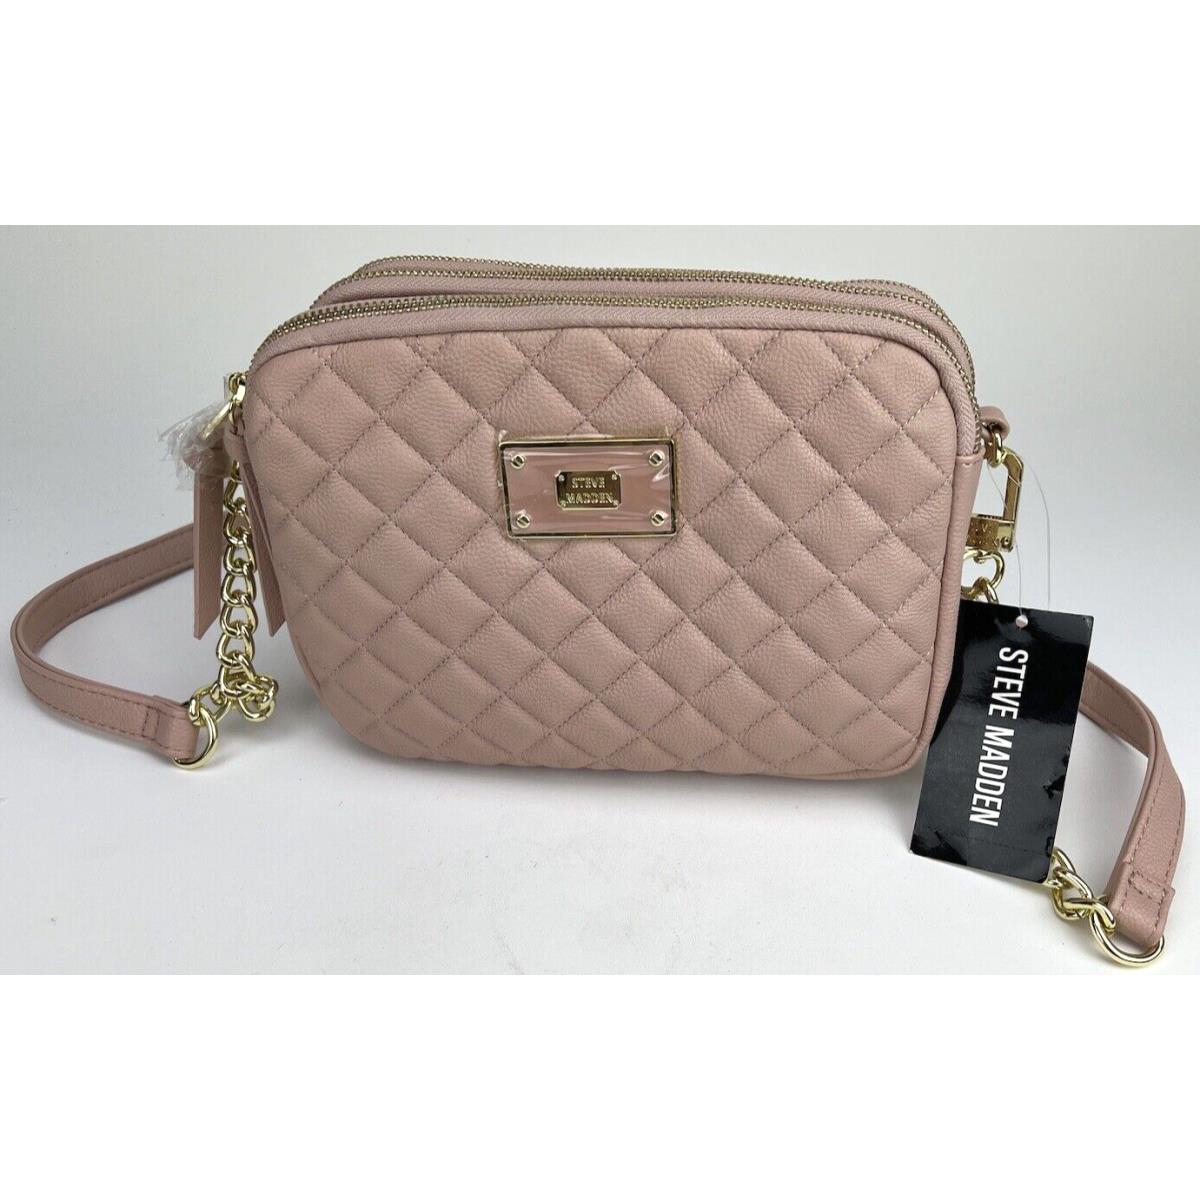 Steve Madden Womens Blush Pink Leather Quilted 3 Pocket Crossbody Bag Purse